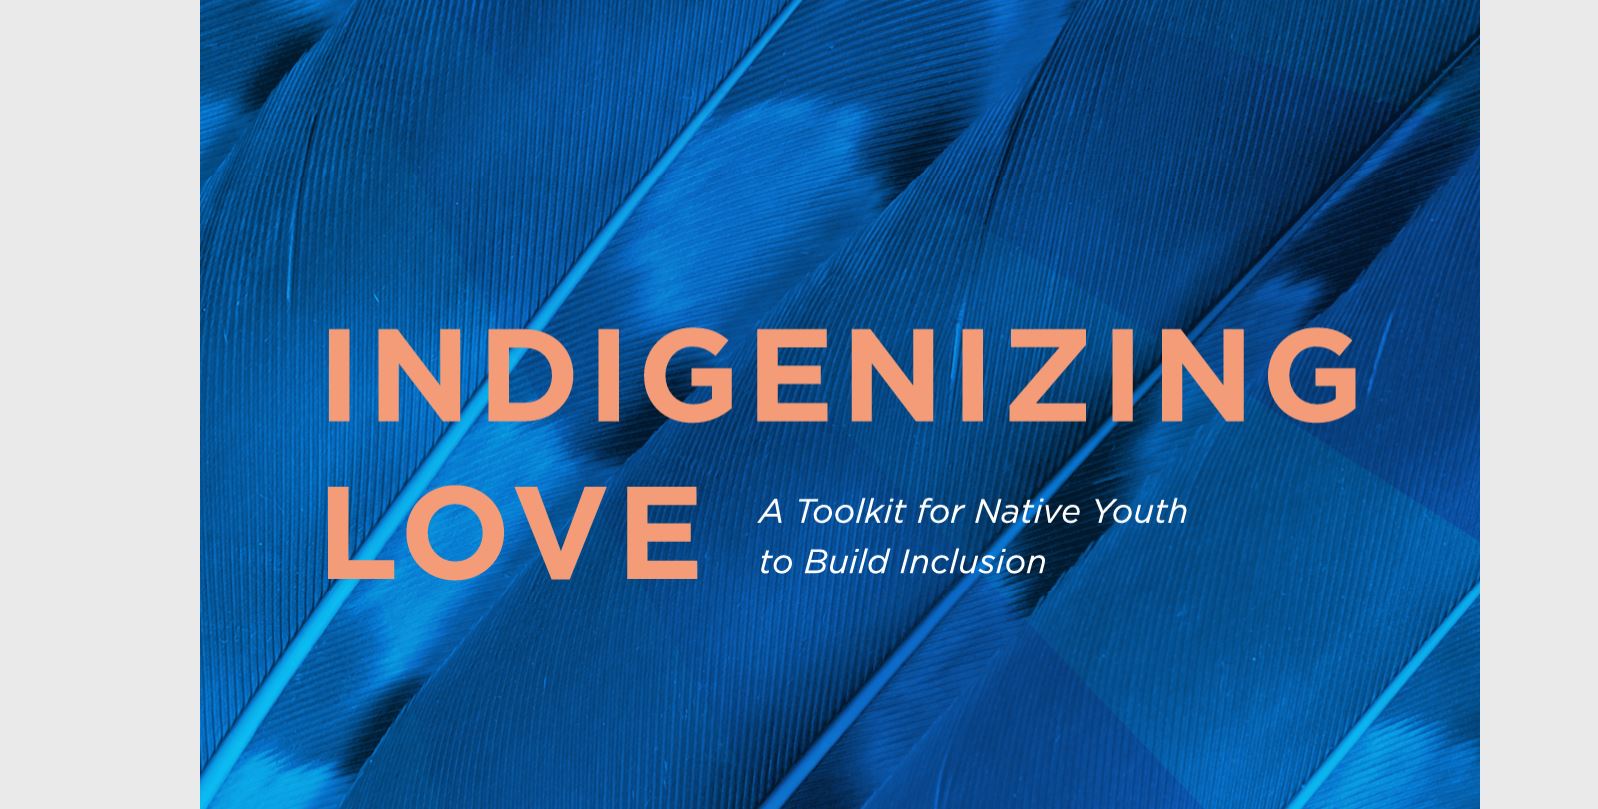 Indigenizing Love: A Toolkit for Native Youth to Build Inclusion